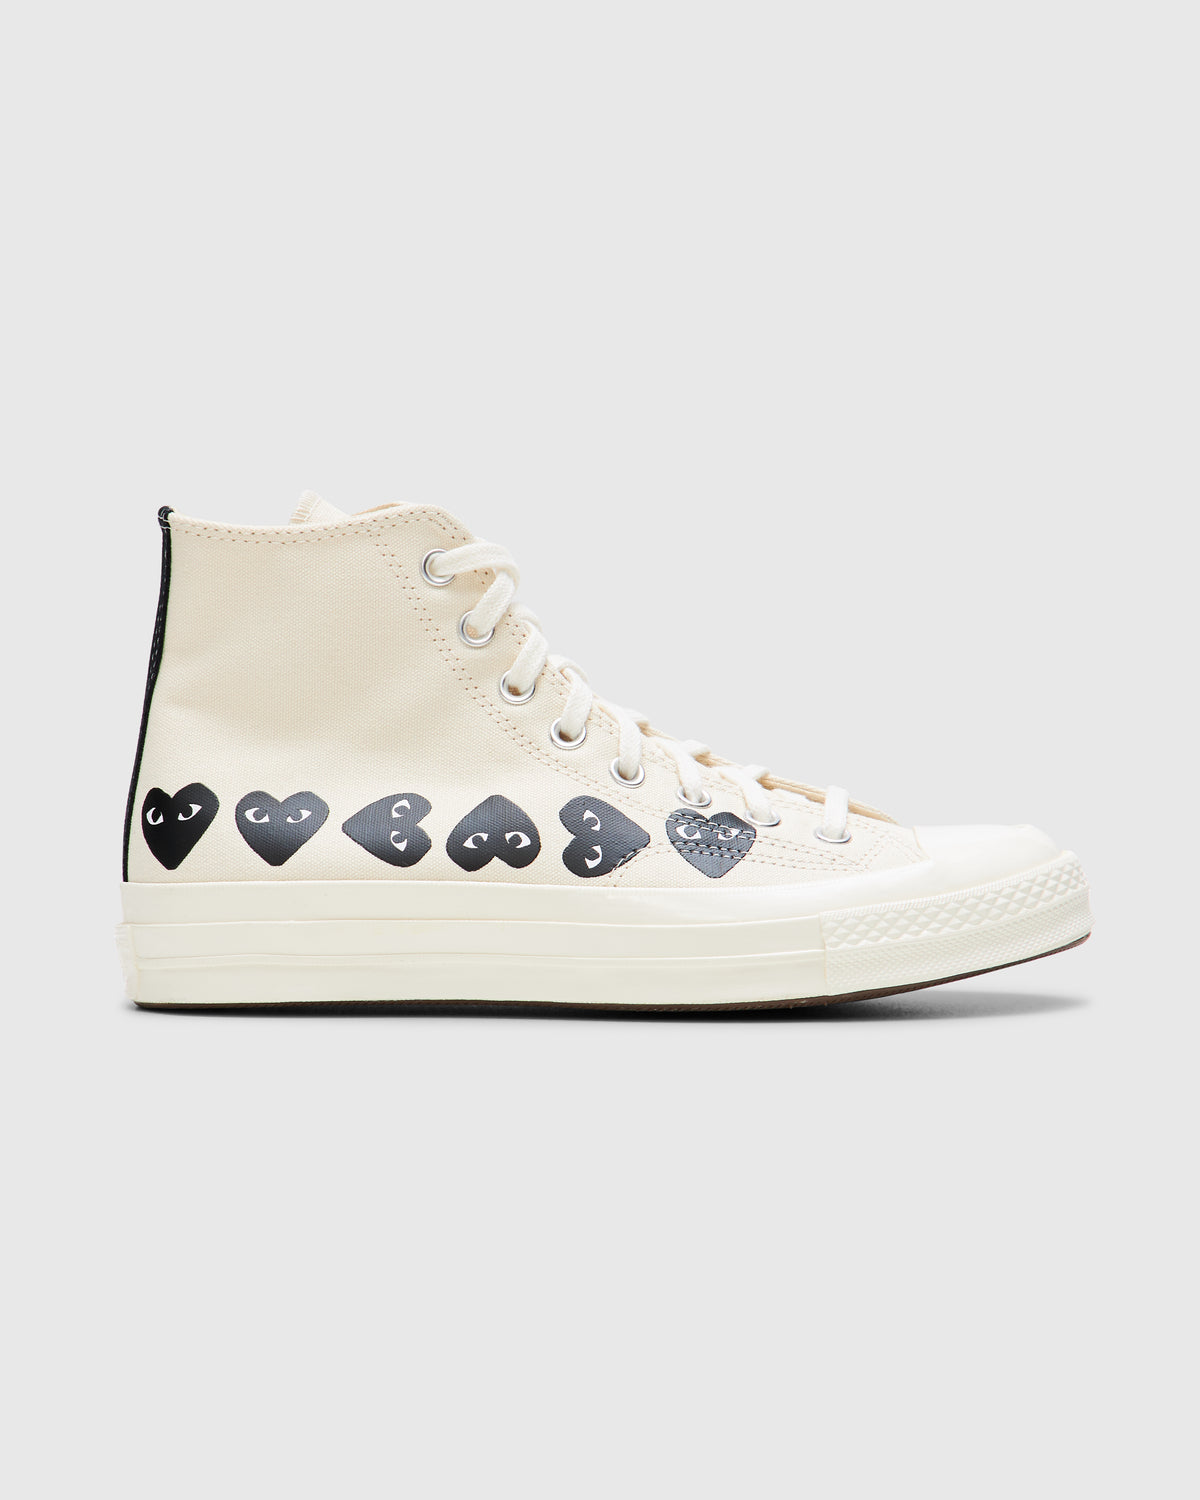 Multi Black Heart Chuck Taylor All Star '70 High in White